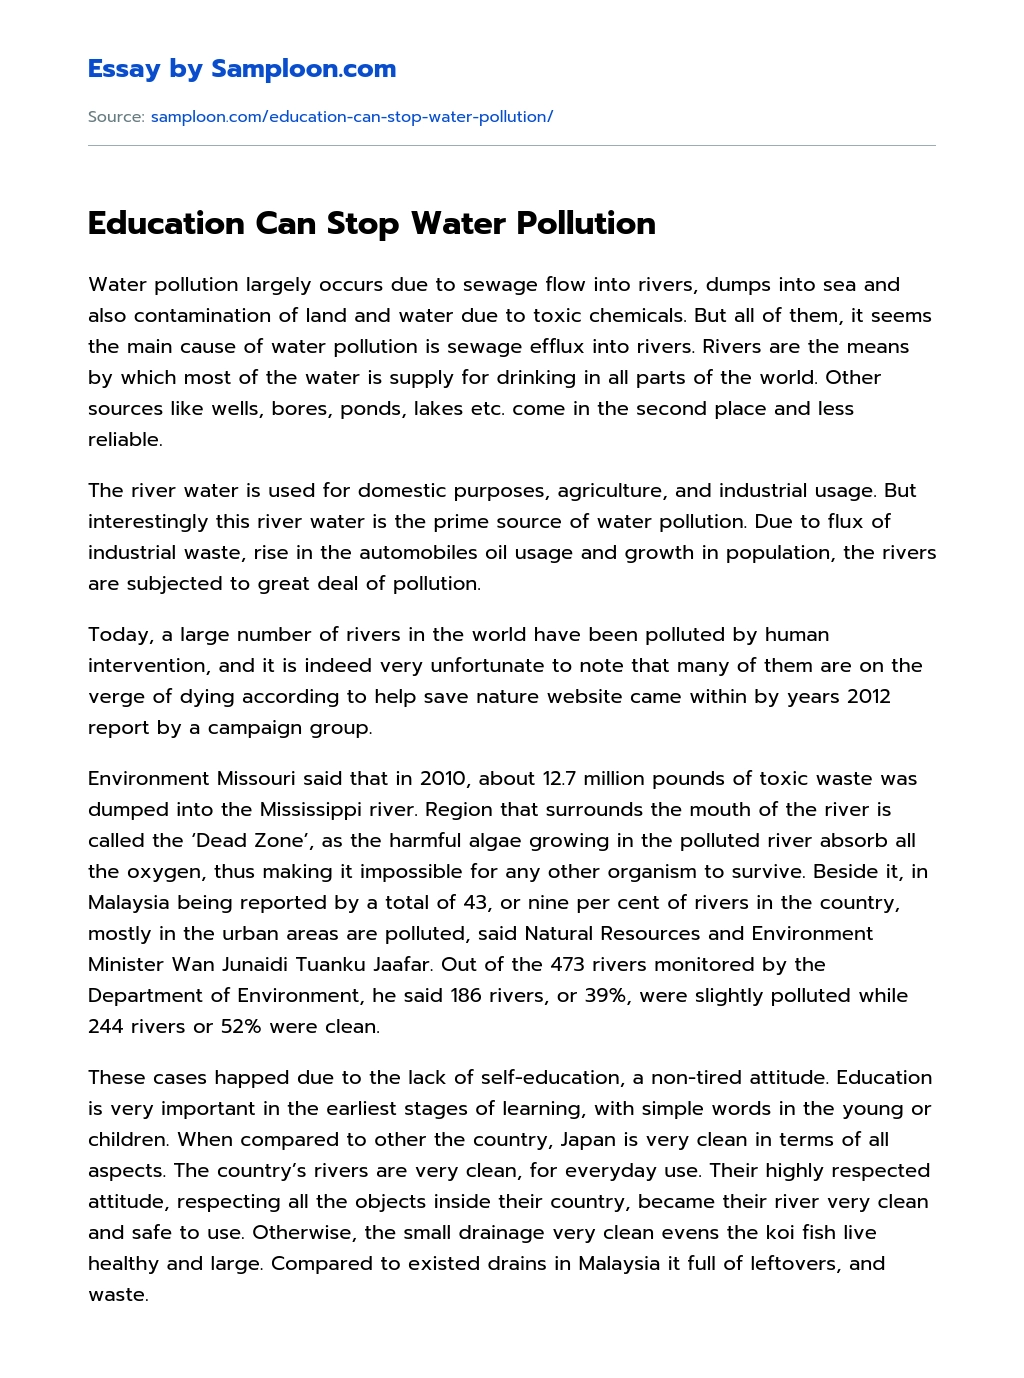 Education Can Stop Water Pollution essay